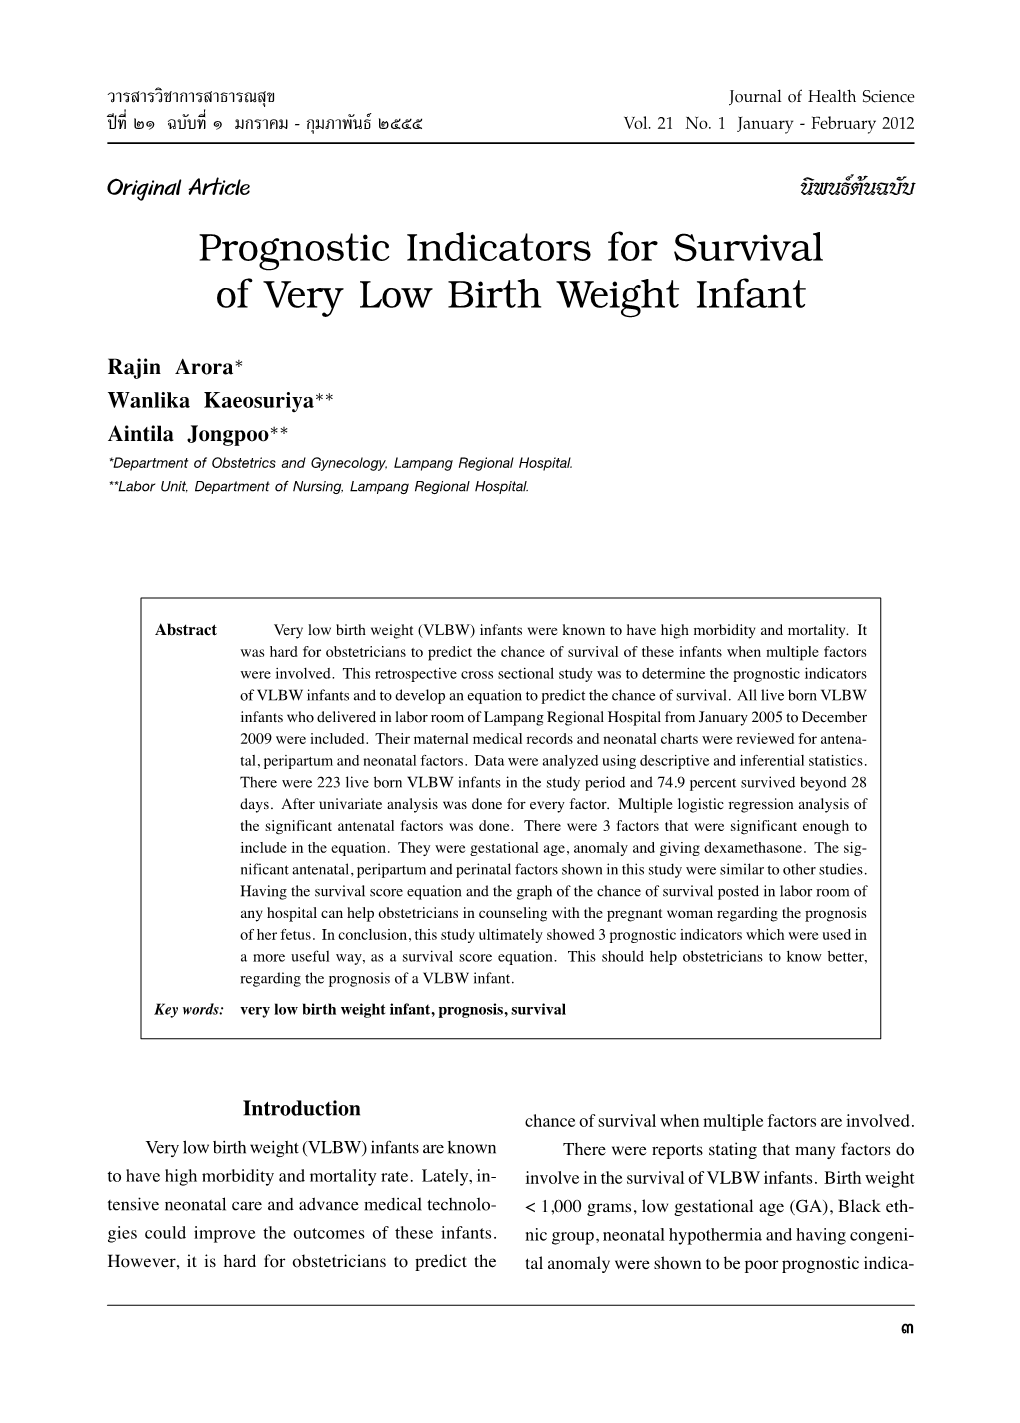 Prognostic Indicators for Survival of Very Low Birth Weight Infant